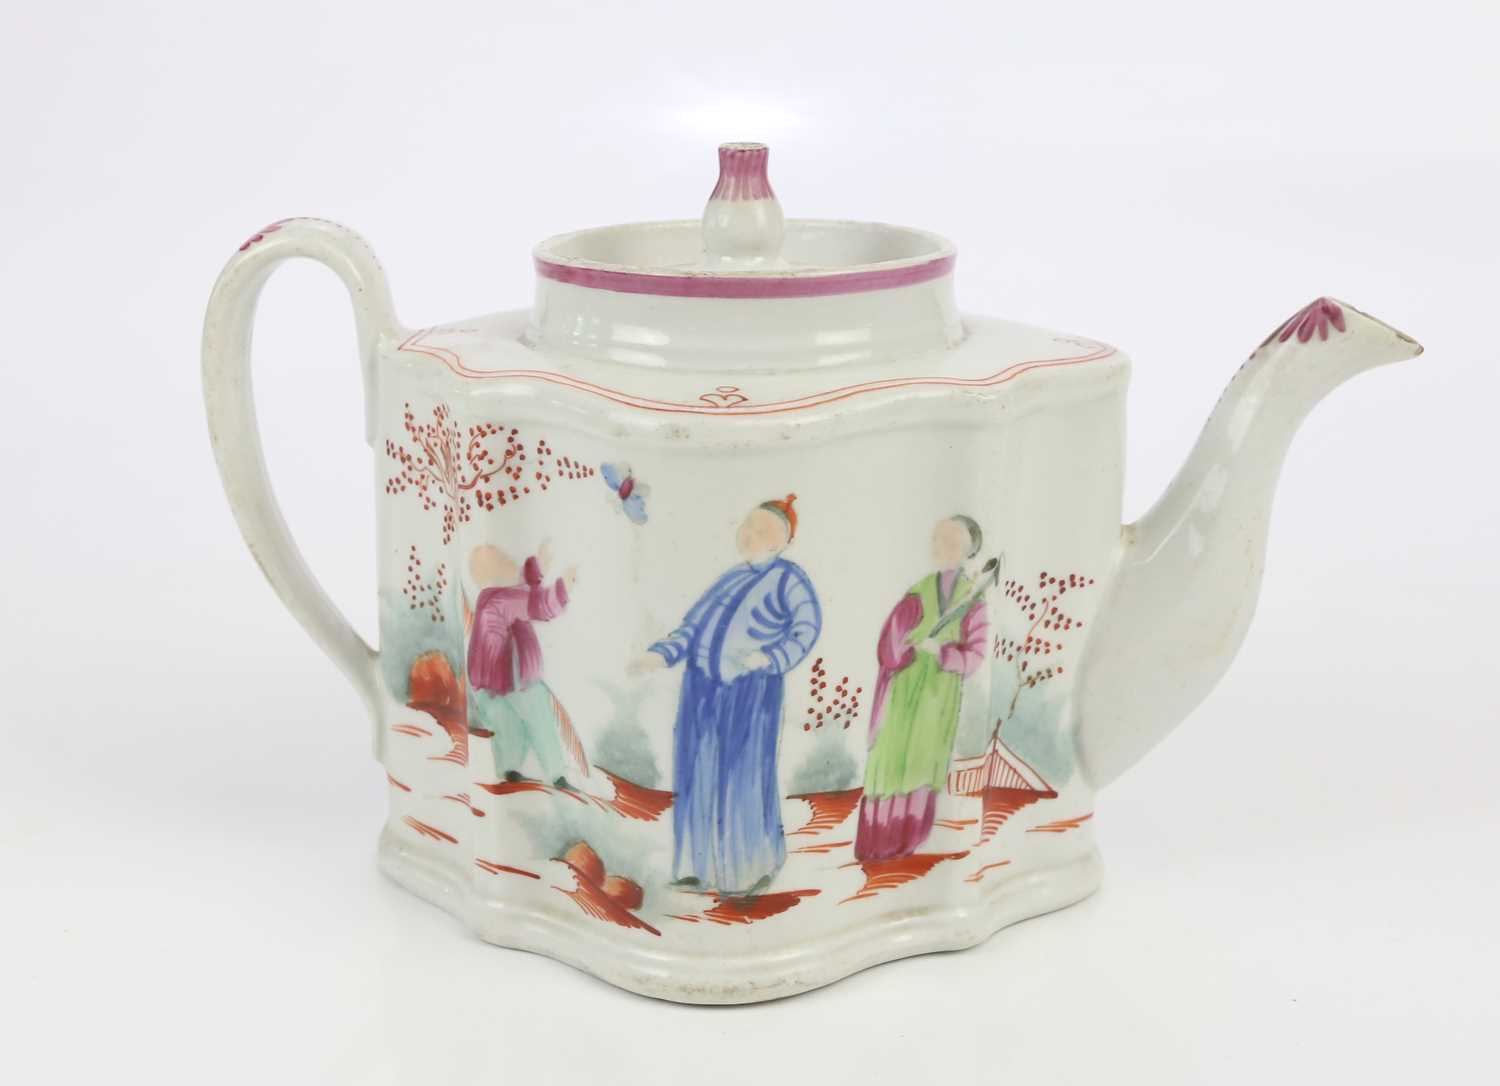 NEW HALL; a late 18th century porcelain teapot, decorated with Oriental figures in a garden, pattern